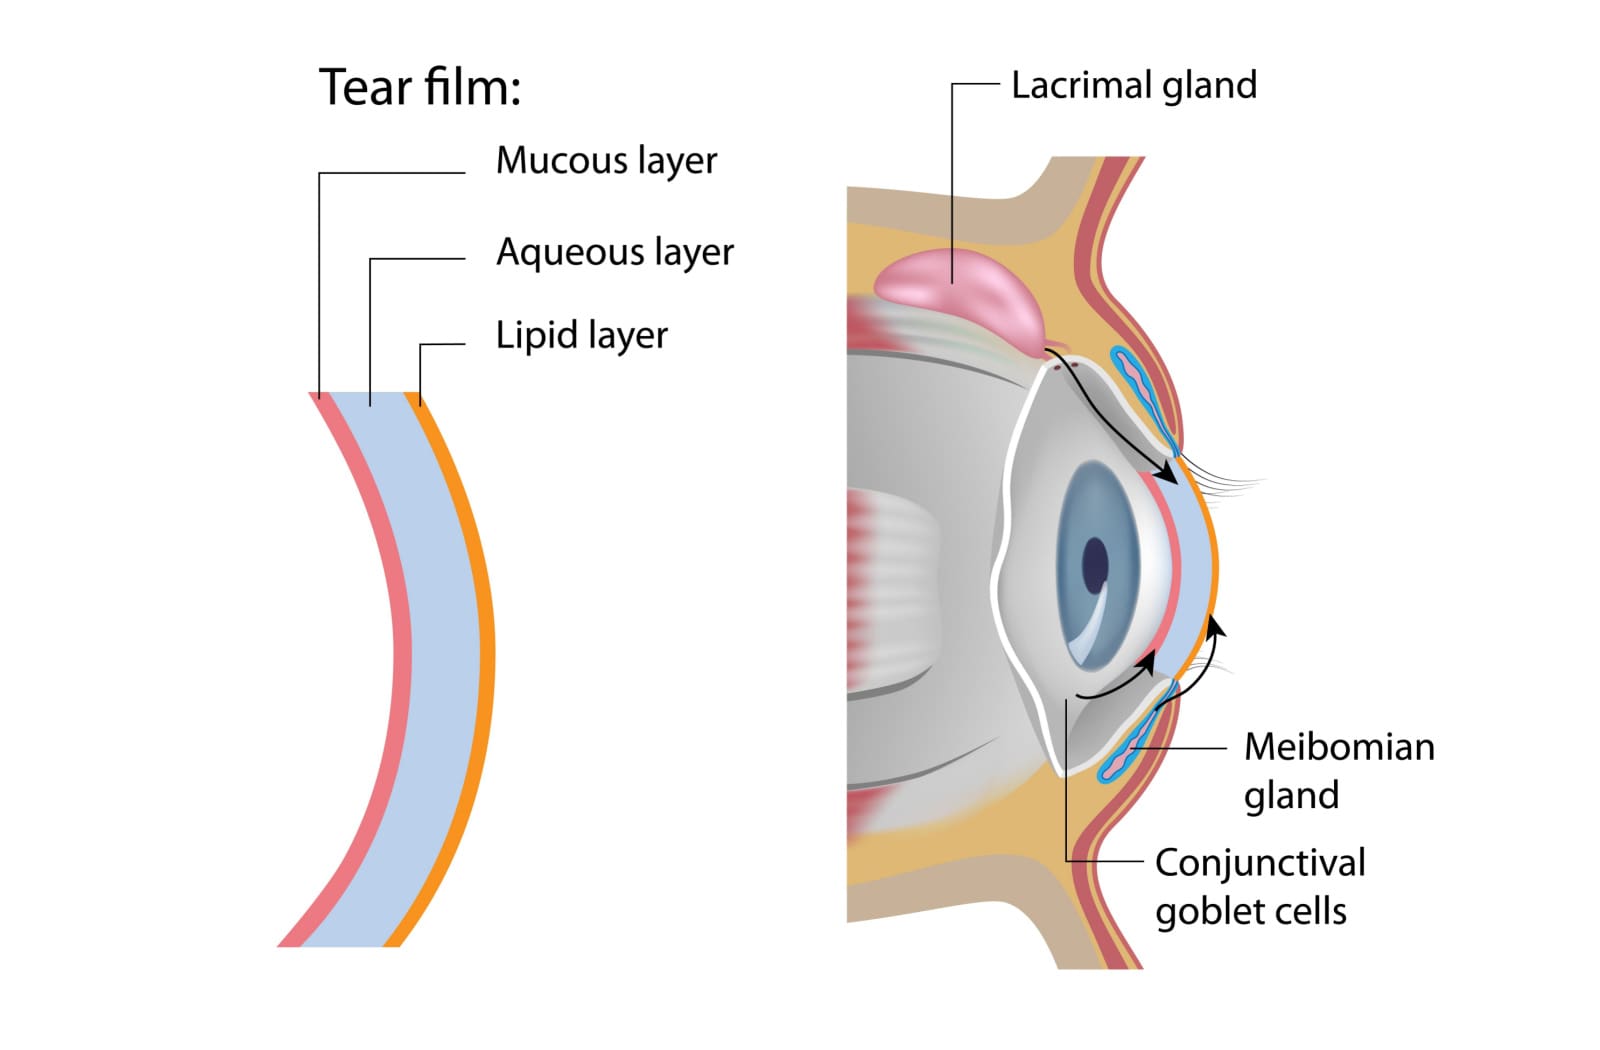 A diagram showing the three layers of tear film in an eye.